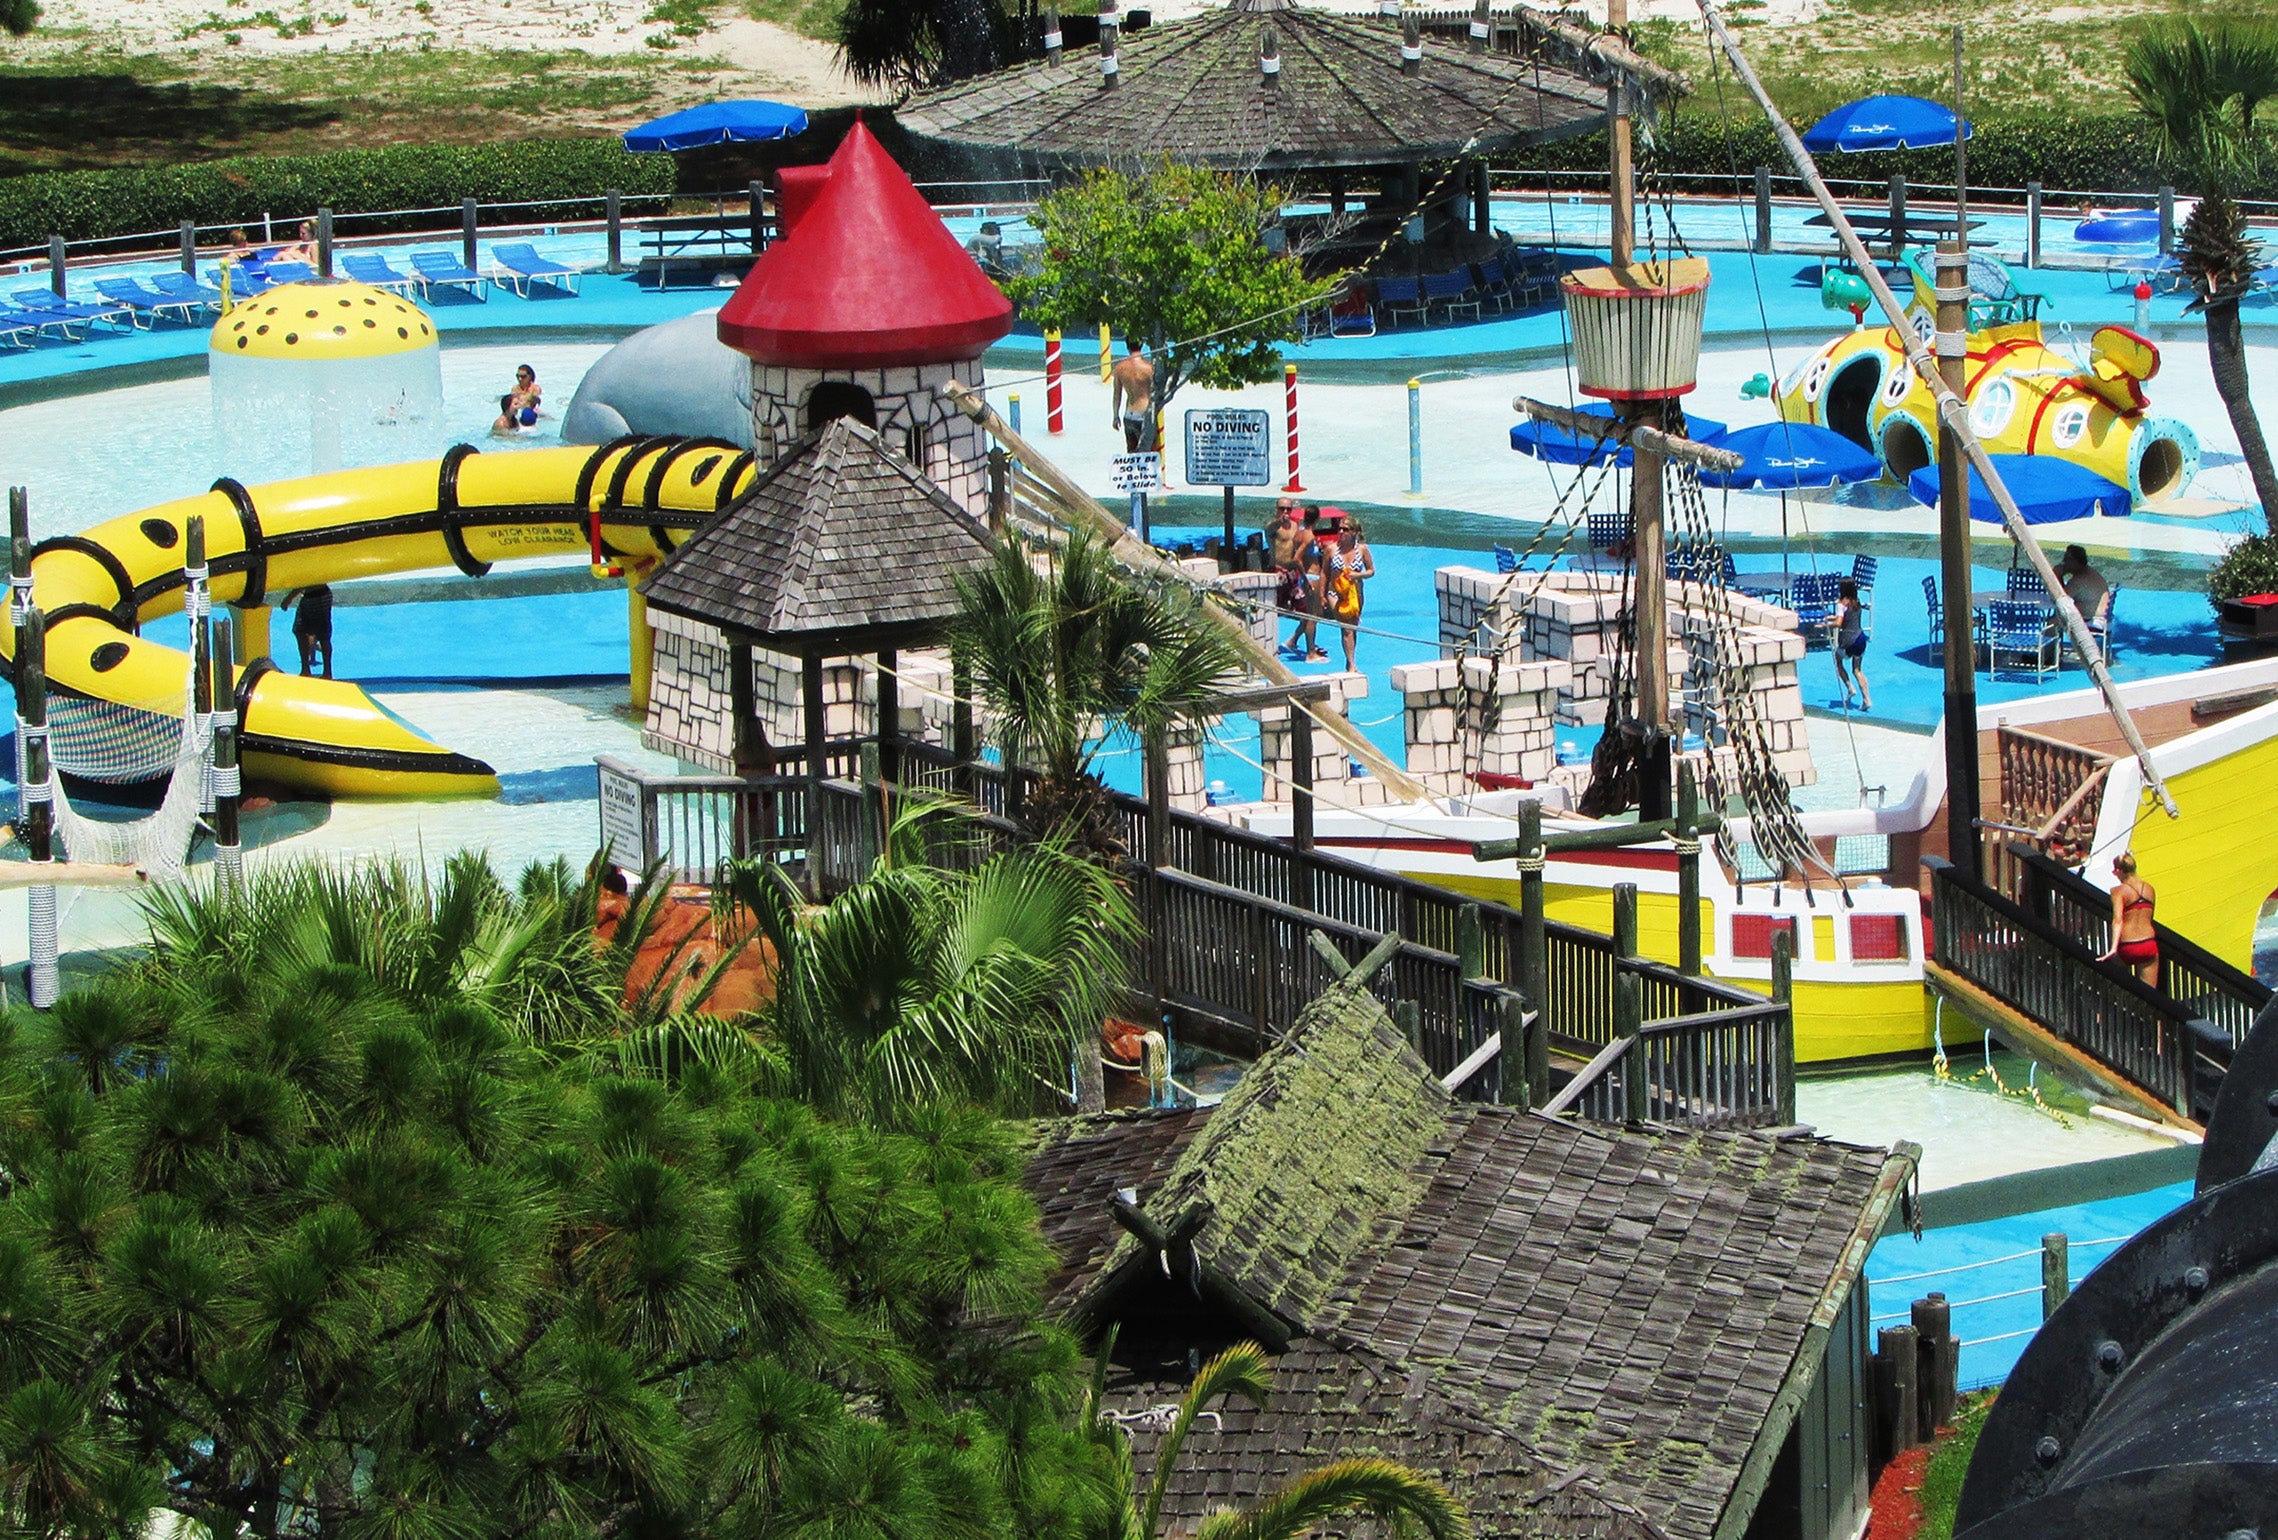 Check out Shipwreck Island Waterpark nearby